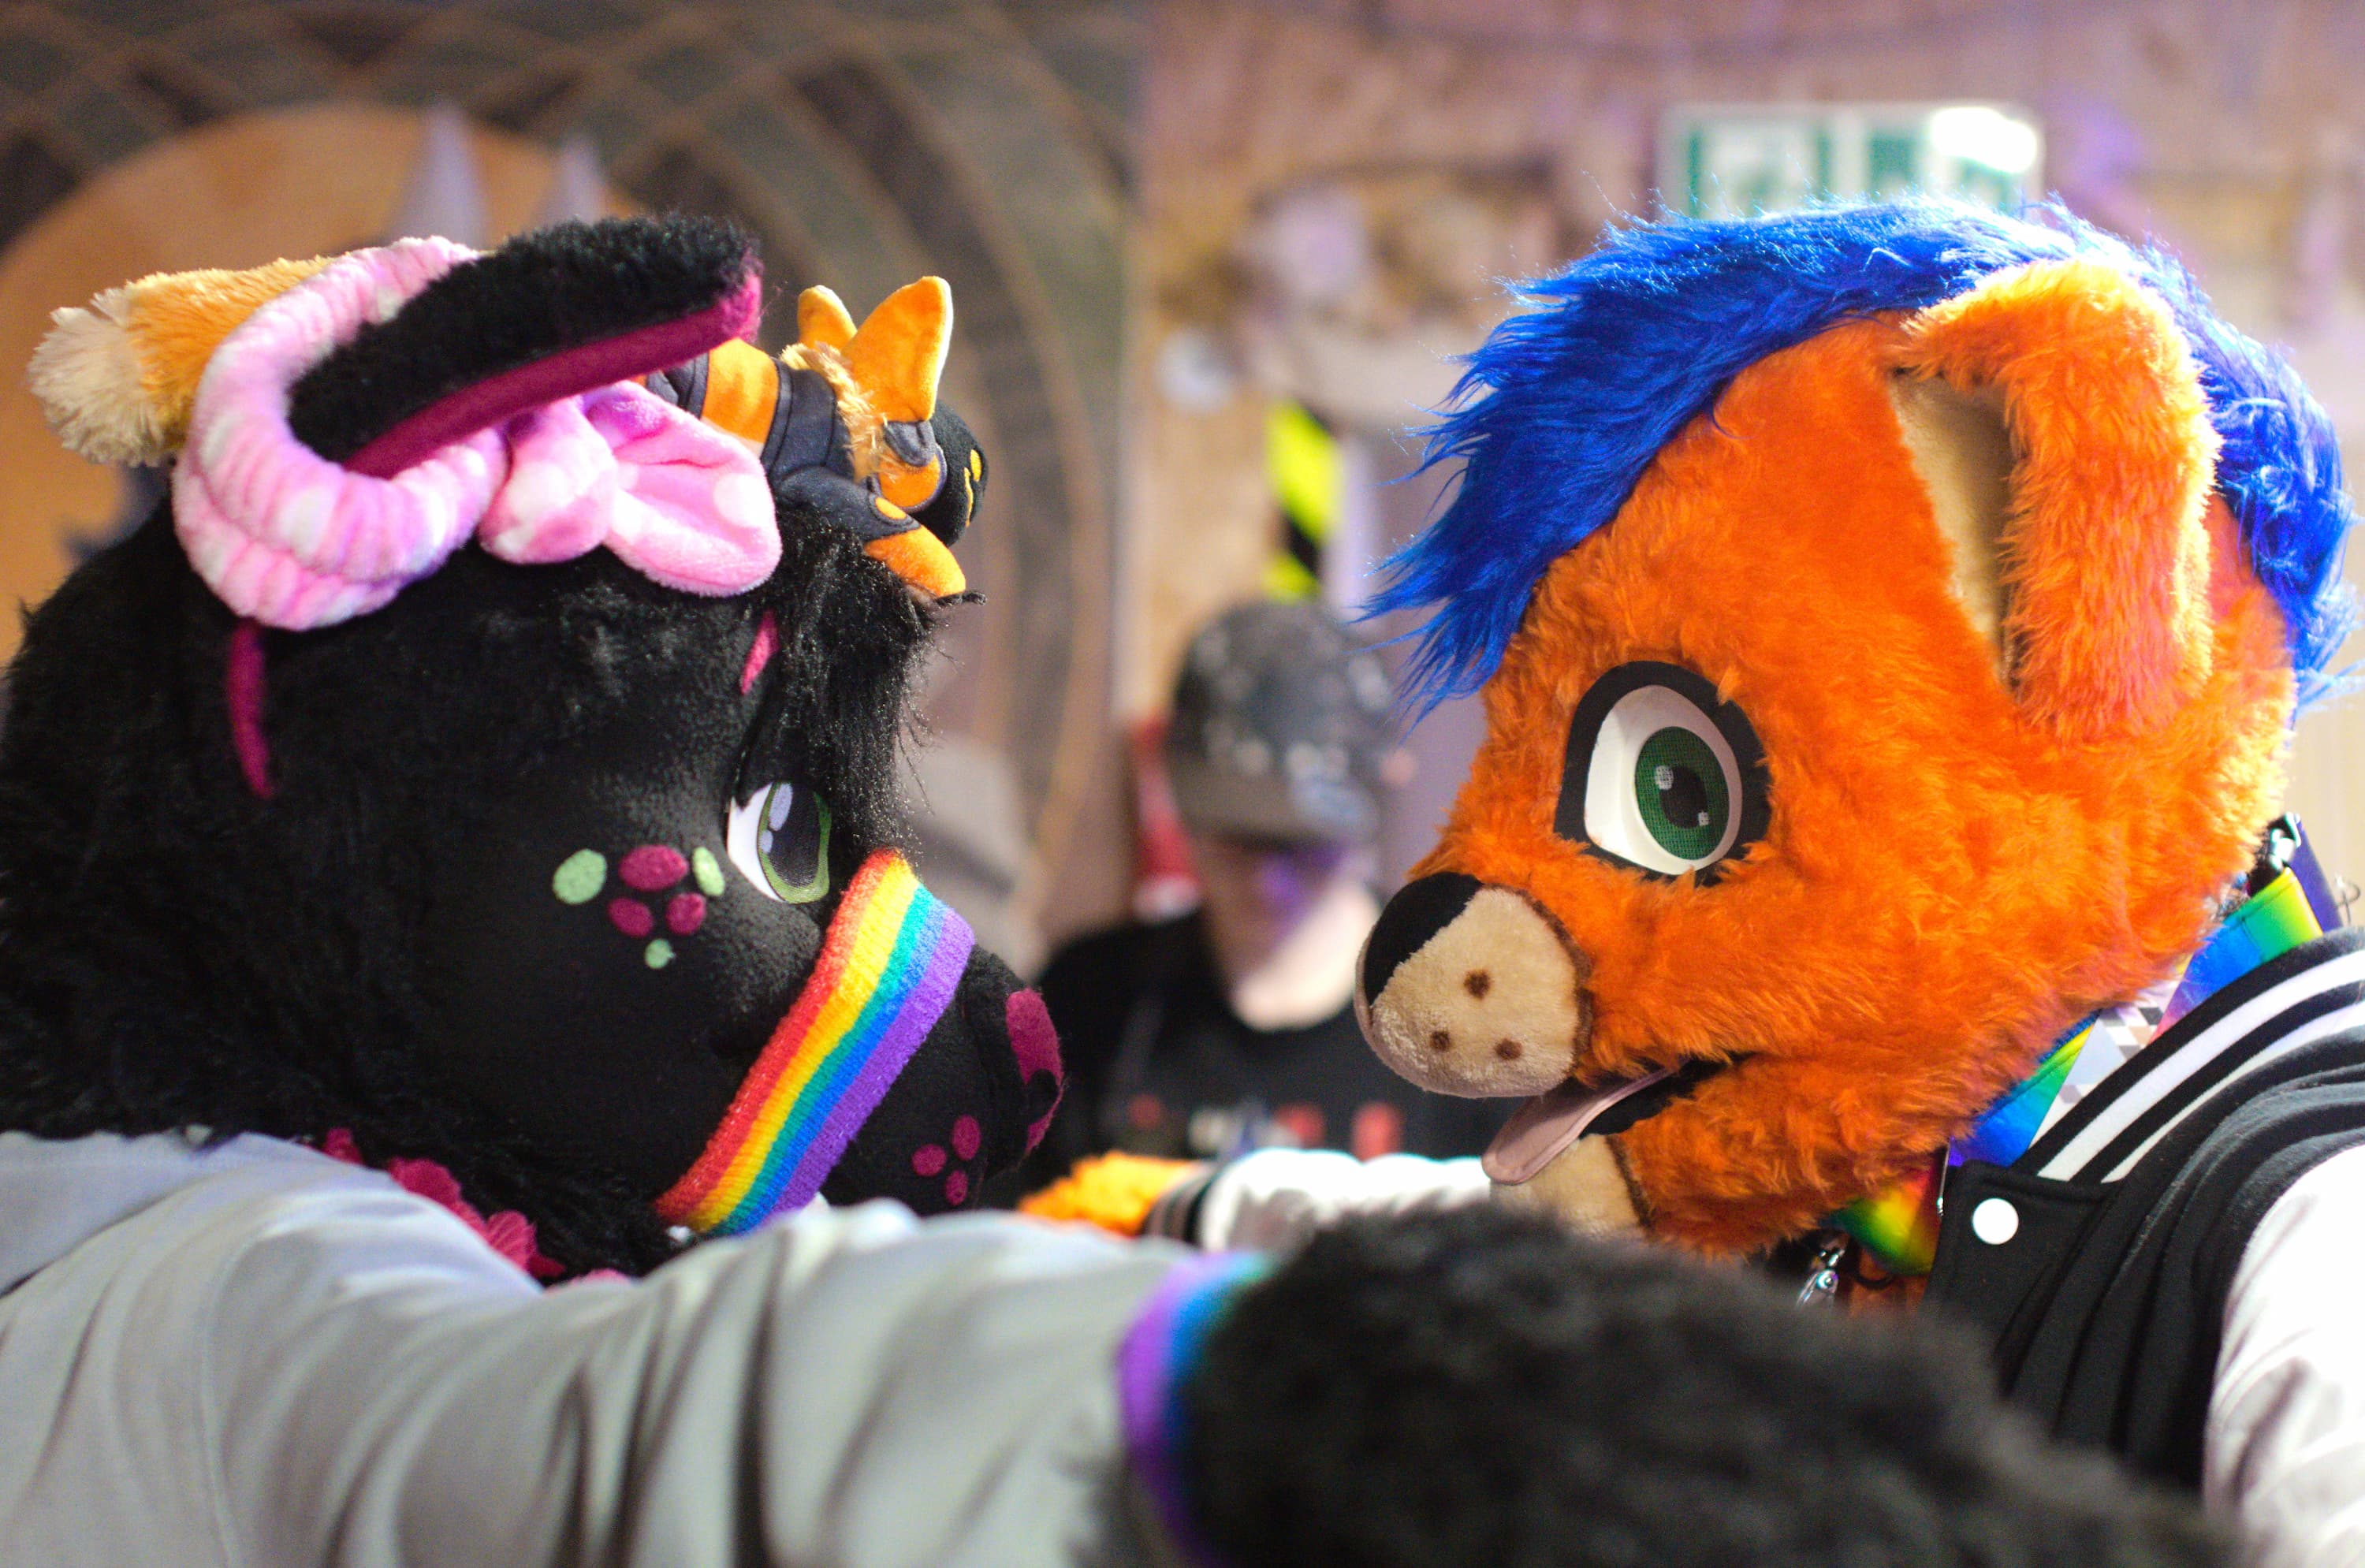 A black cat fursuit with purple spots and a purple nose with a rainbow band around its muzzle locking eyes with another orange cat fursuit with blue hair